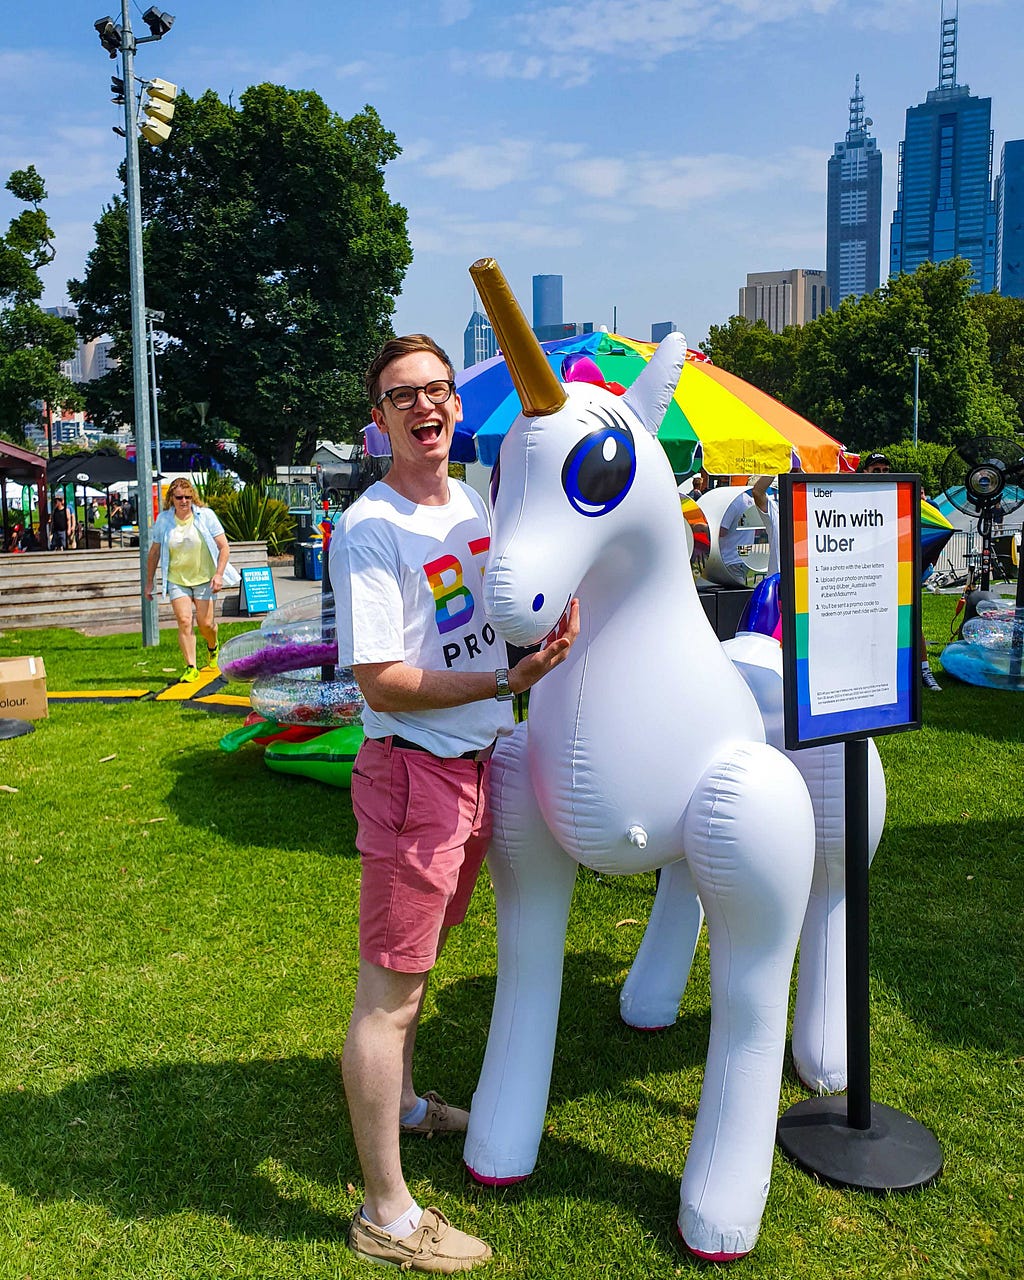 The author next to a large white inflatable unicorn, with a cheeky grin on their face.